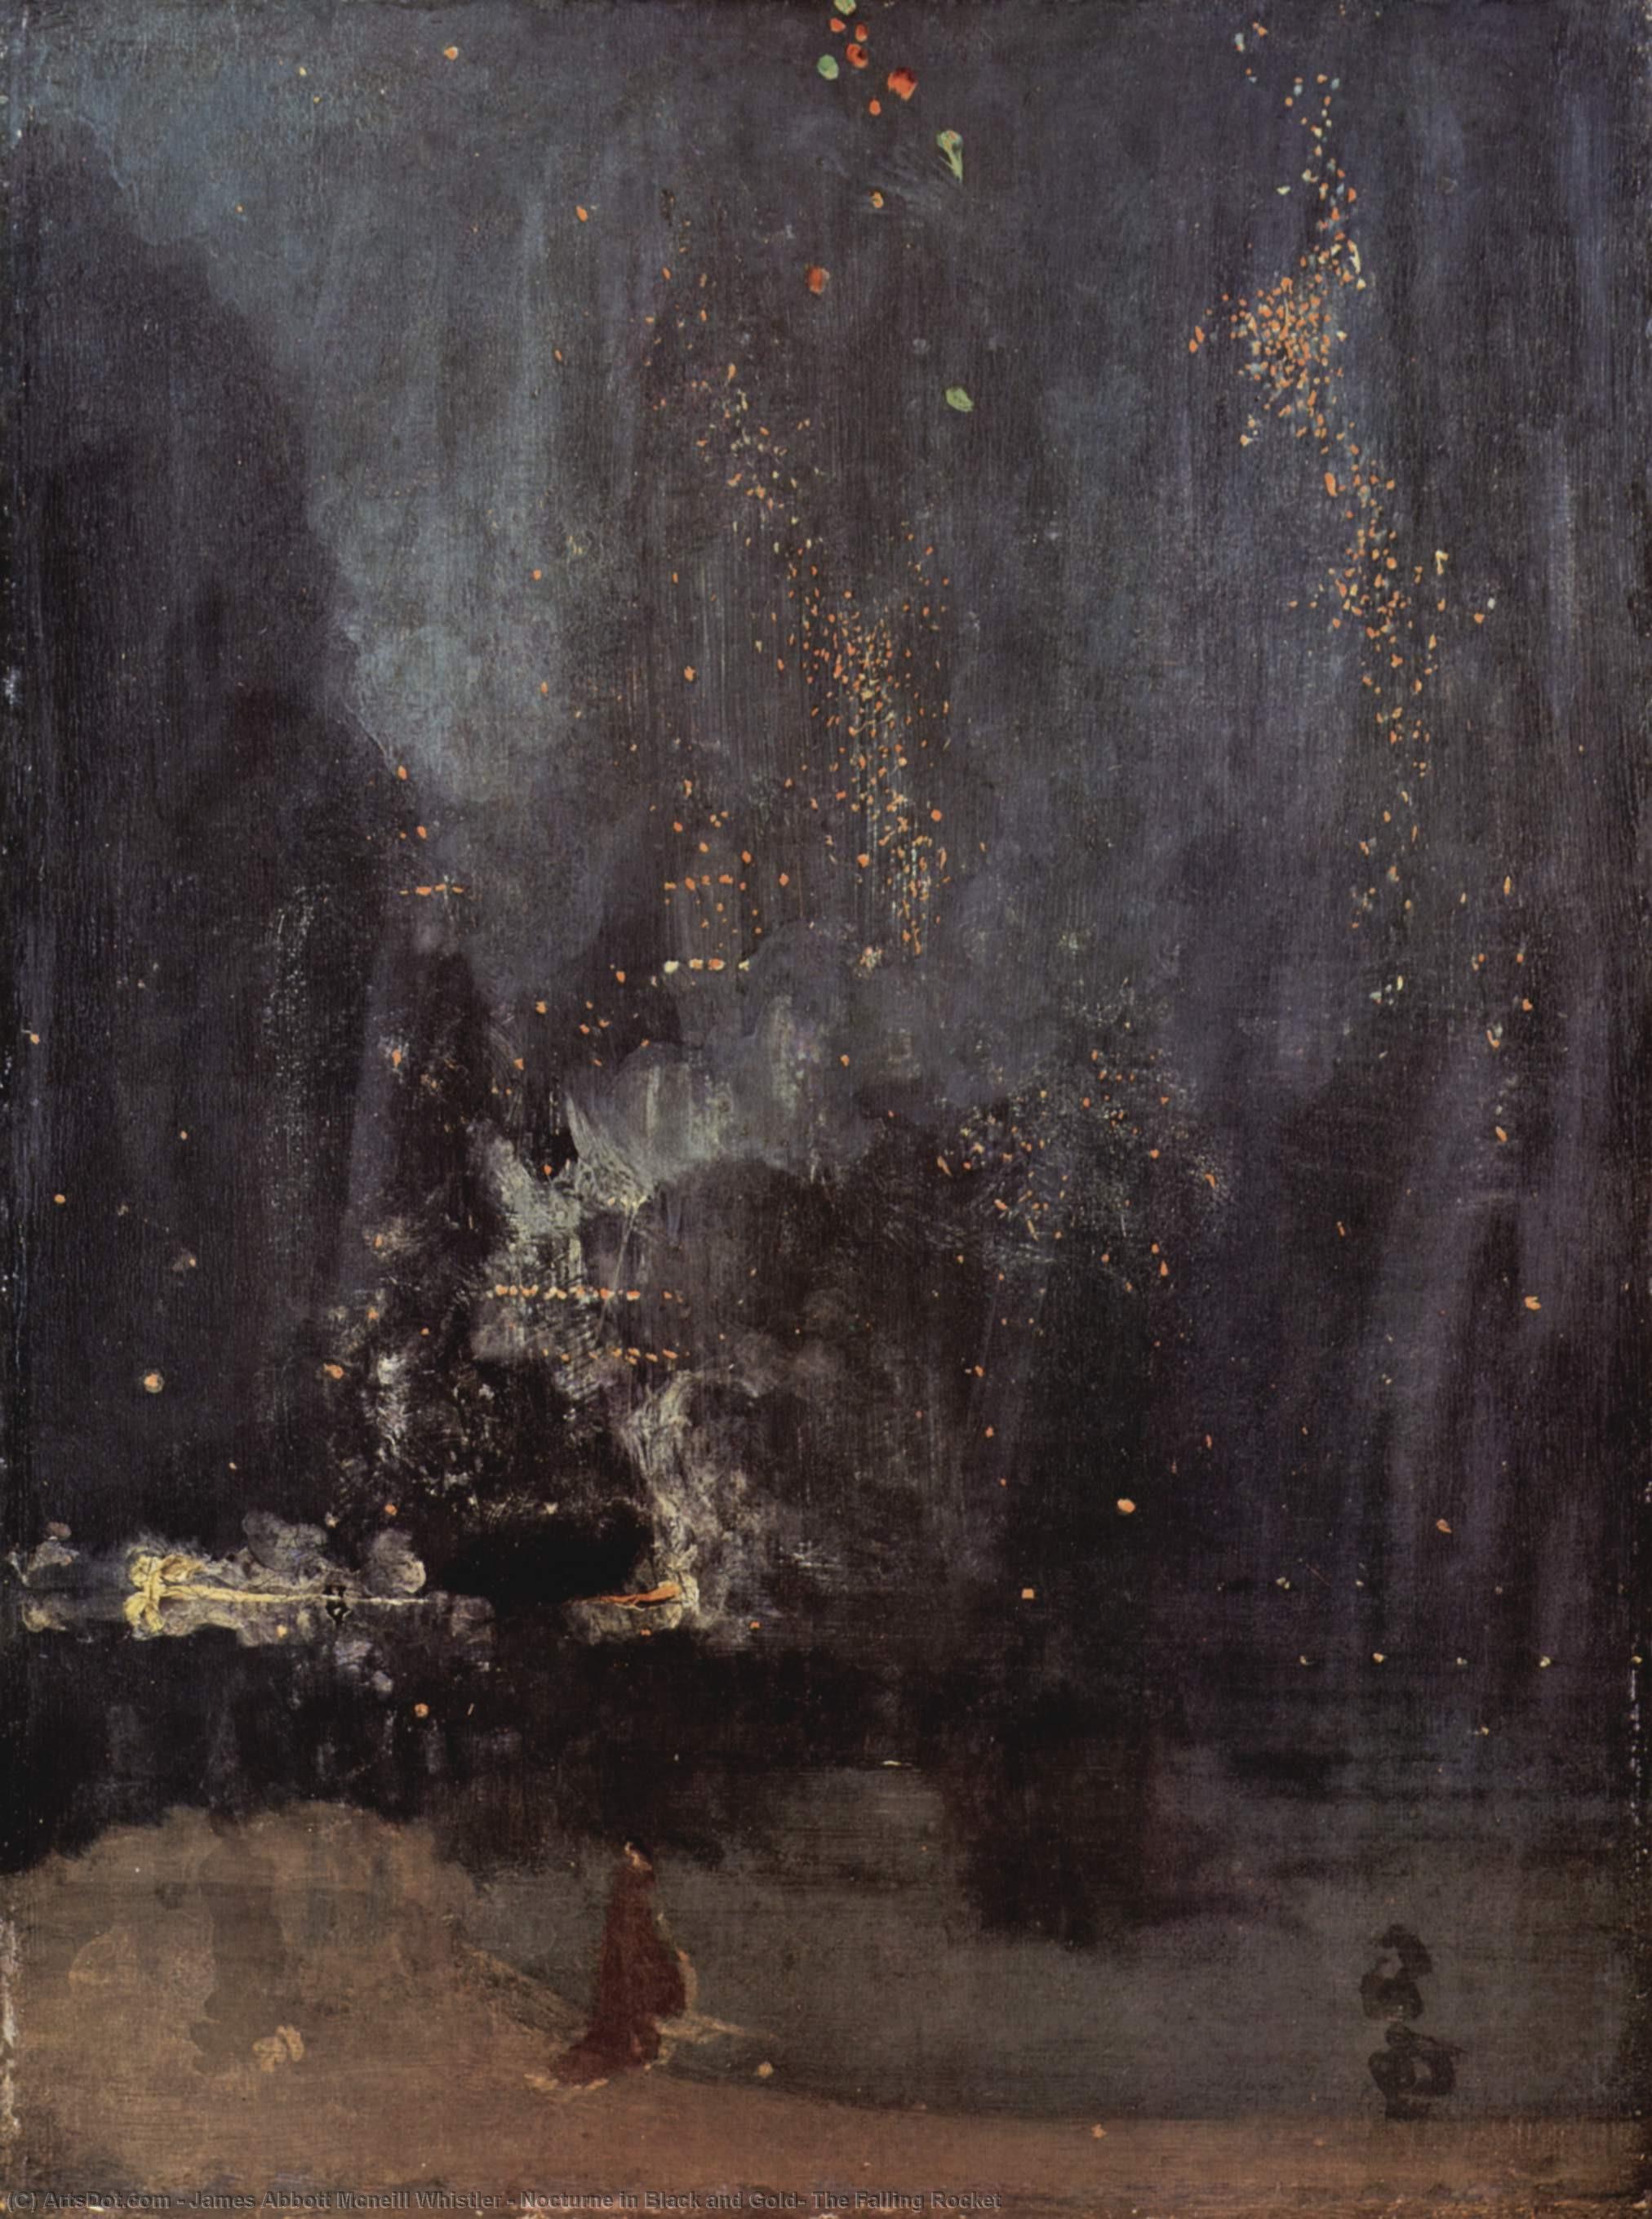 WikiOO.org - 백과 사전 - 회화, 삽화 James Abbott Mcneill Whistler - Nocturne in Black and Gold, The Falling Rocket